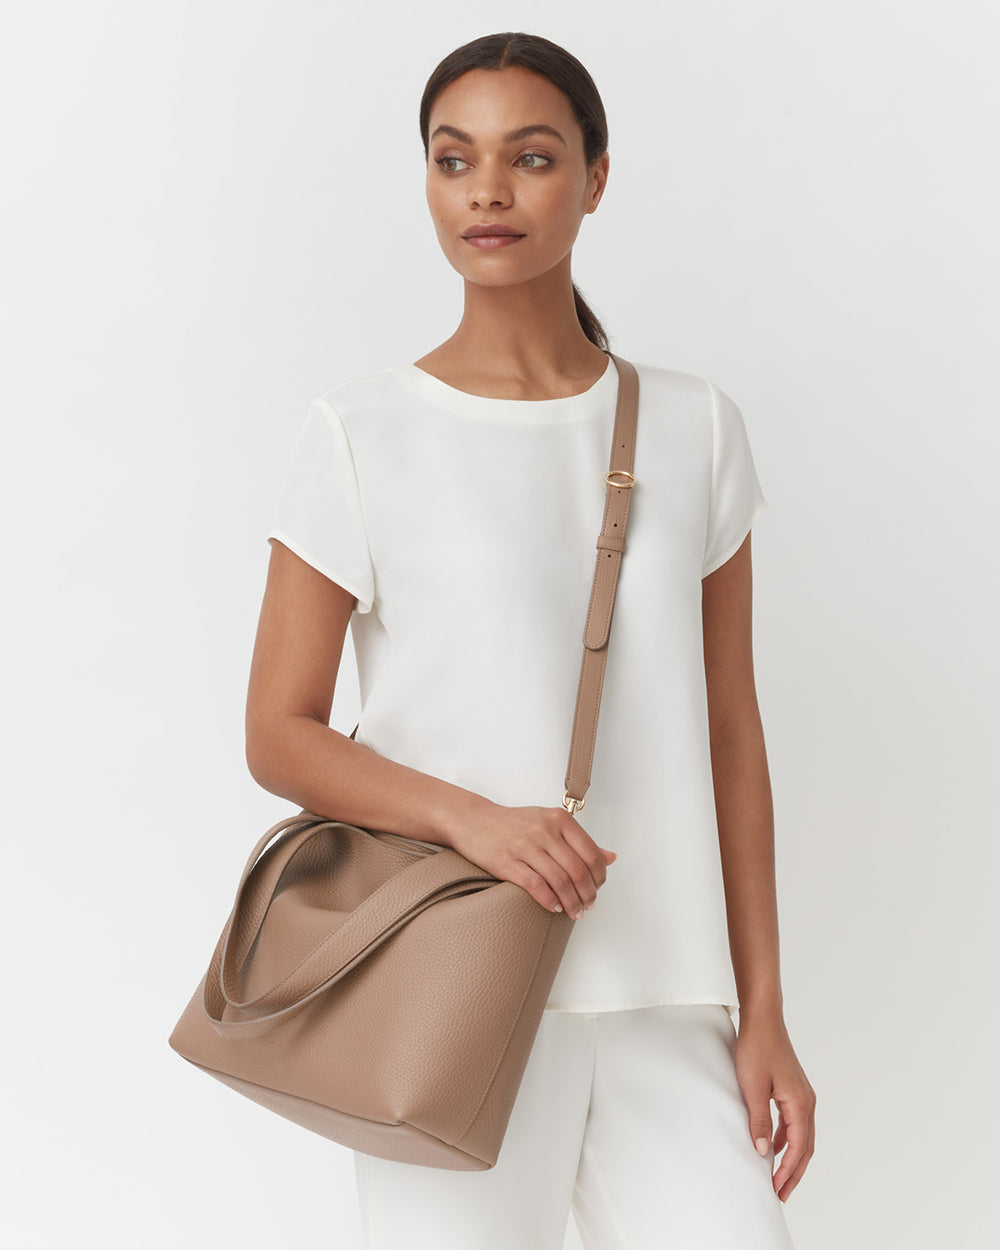 Woman standing with a handbag on her shoulder.